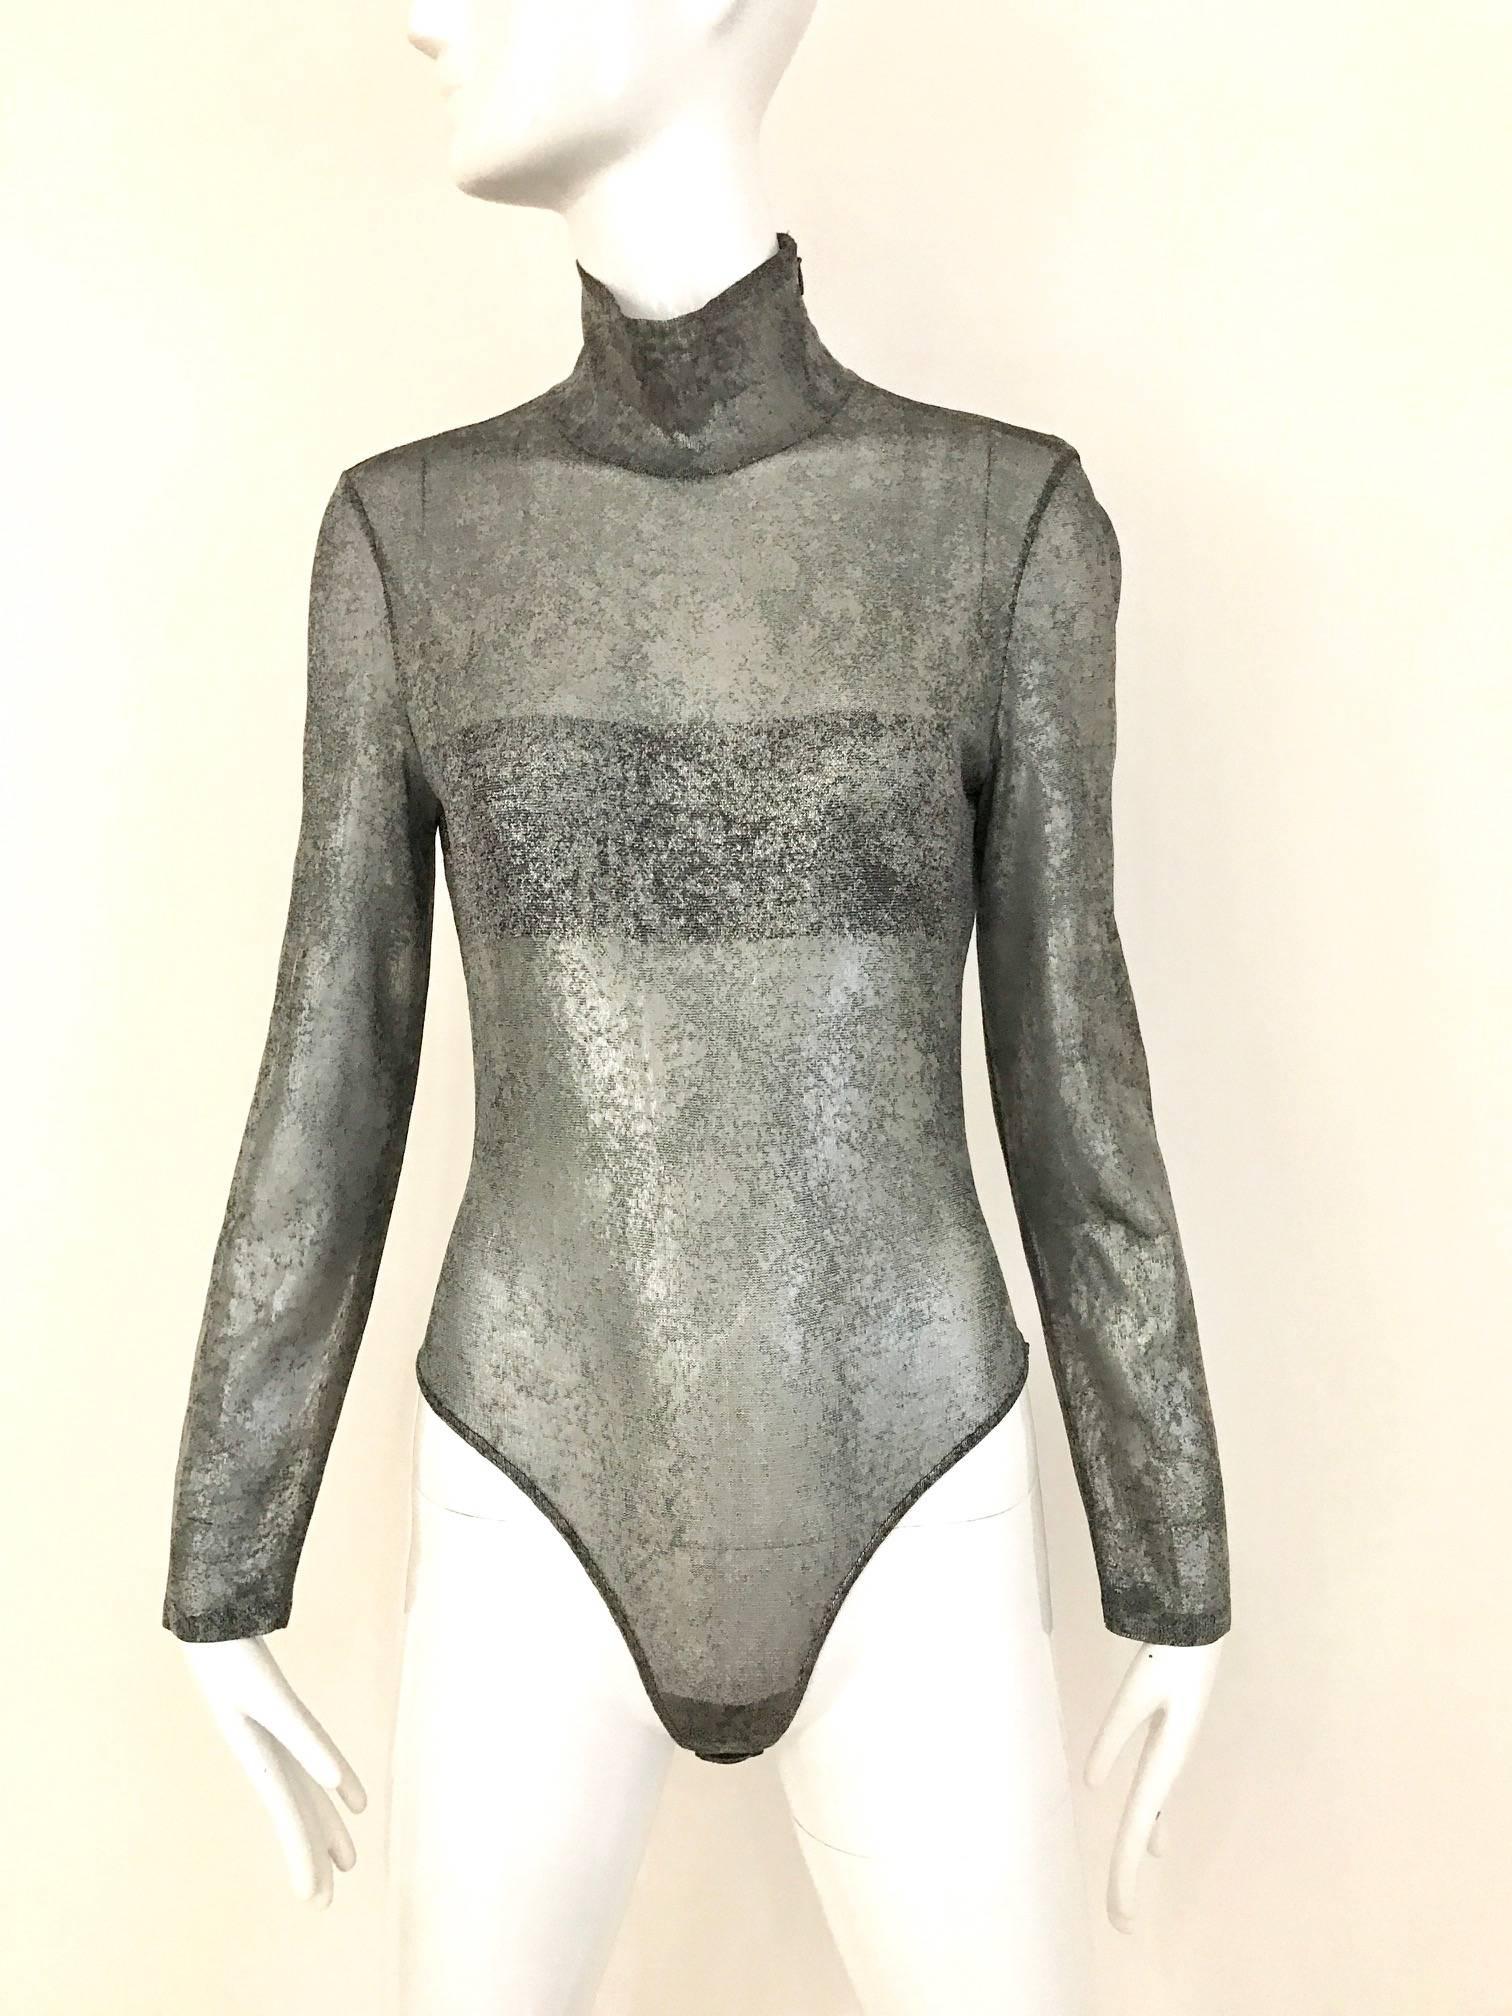 1980s GIANFRANCO FERRE Silver Grey Metallic long sleeve  mock neck bodysuit. Zip on the side.
Fit size Medium ( stretchy)
Bust: 34 inch - 36 inch
Waist: 26 inch - 28 inch / hip: 30 inch - 34 inch / Length 26 inch
**** This Garment has been